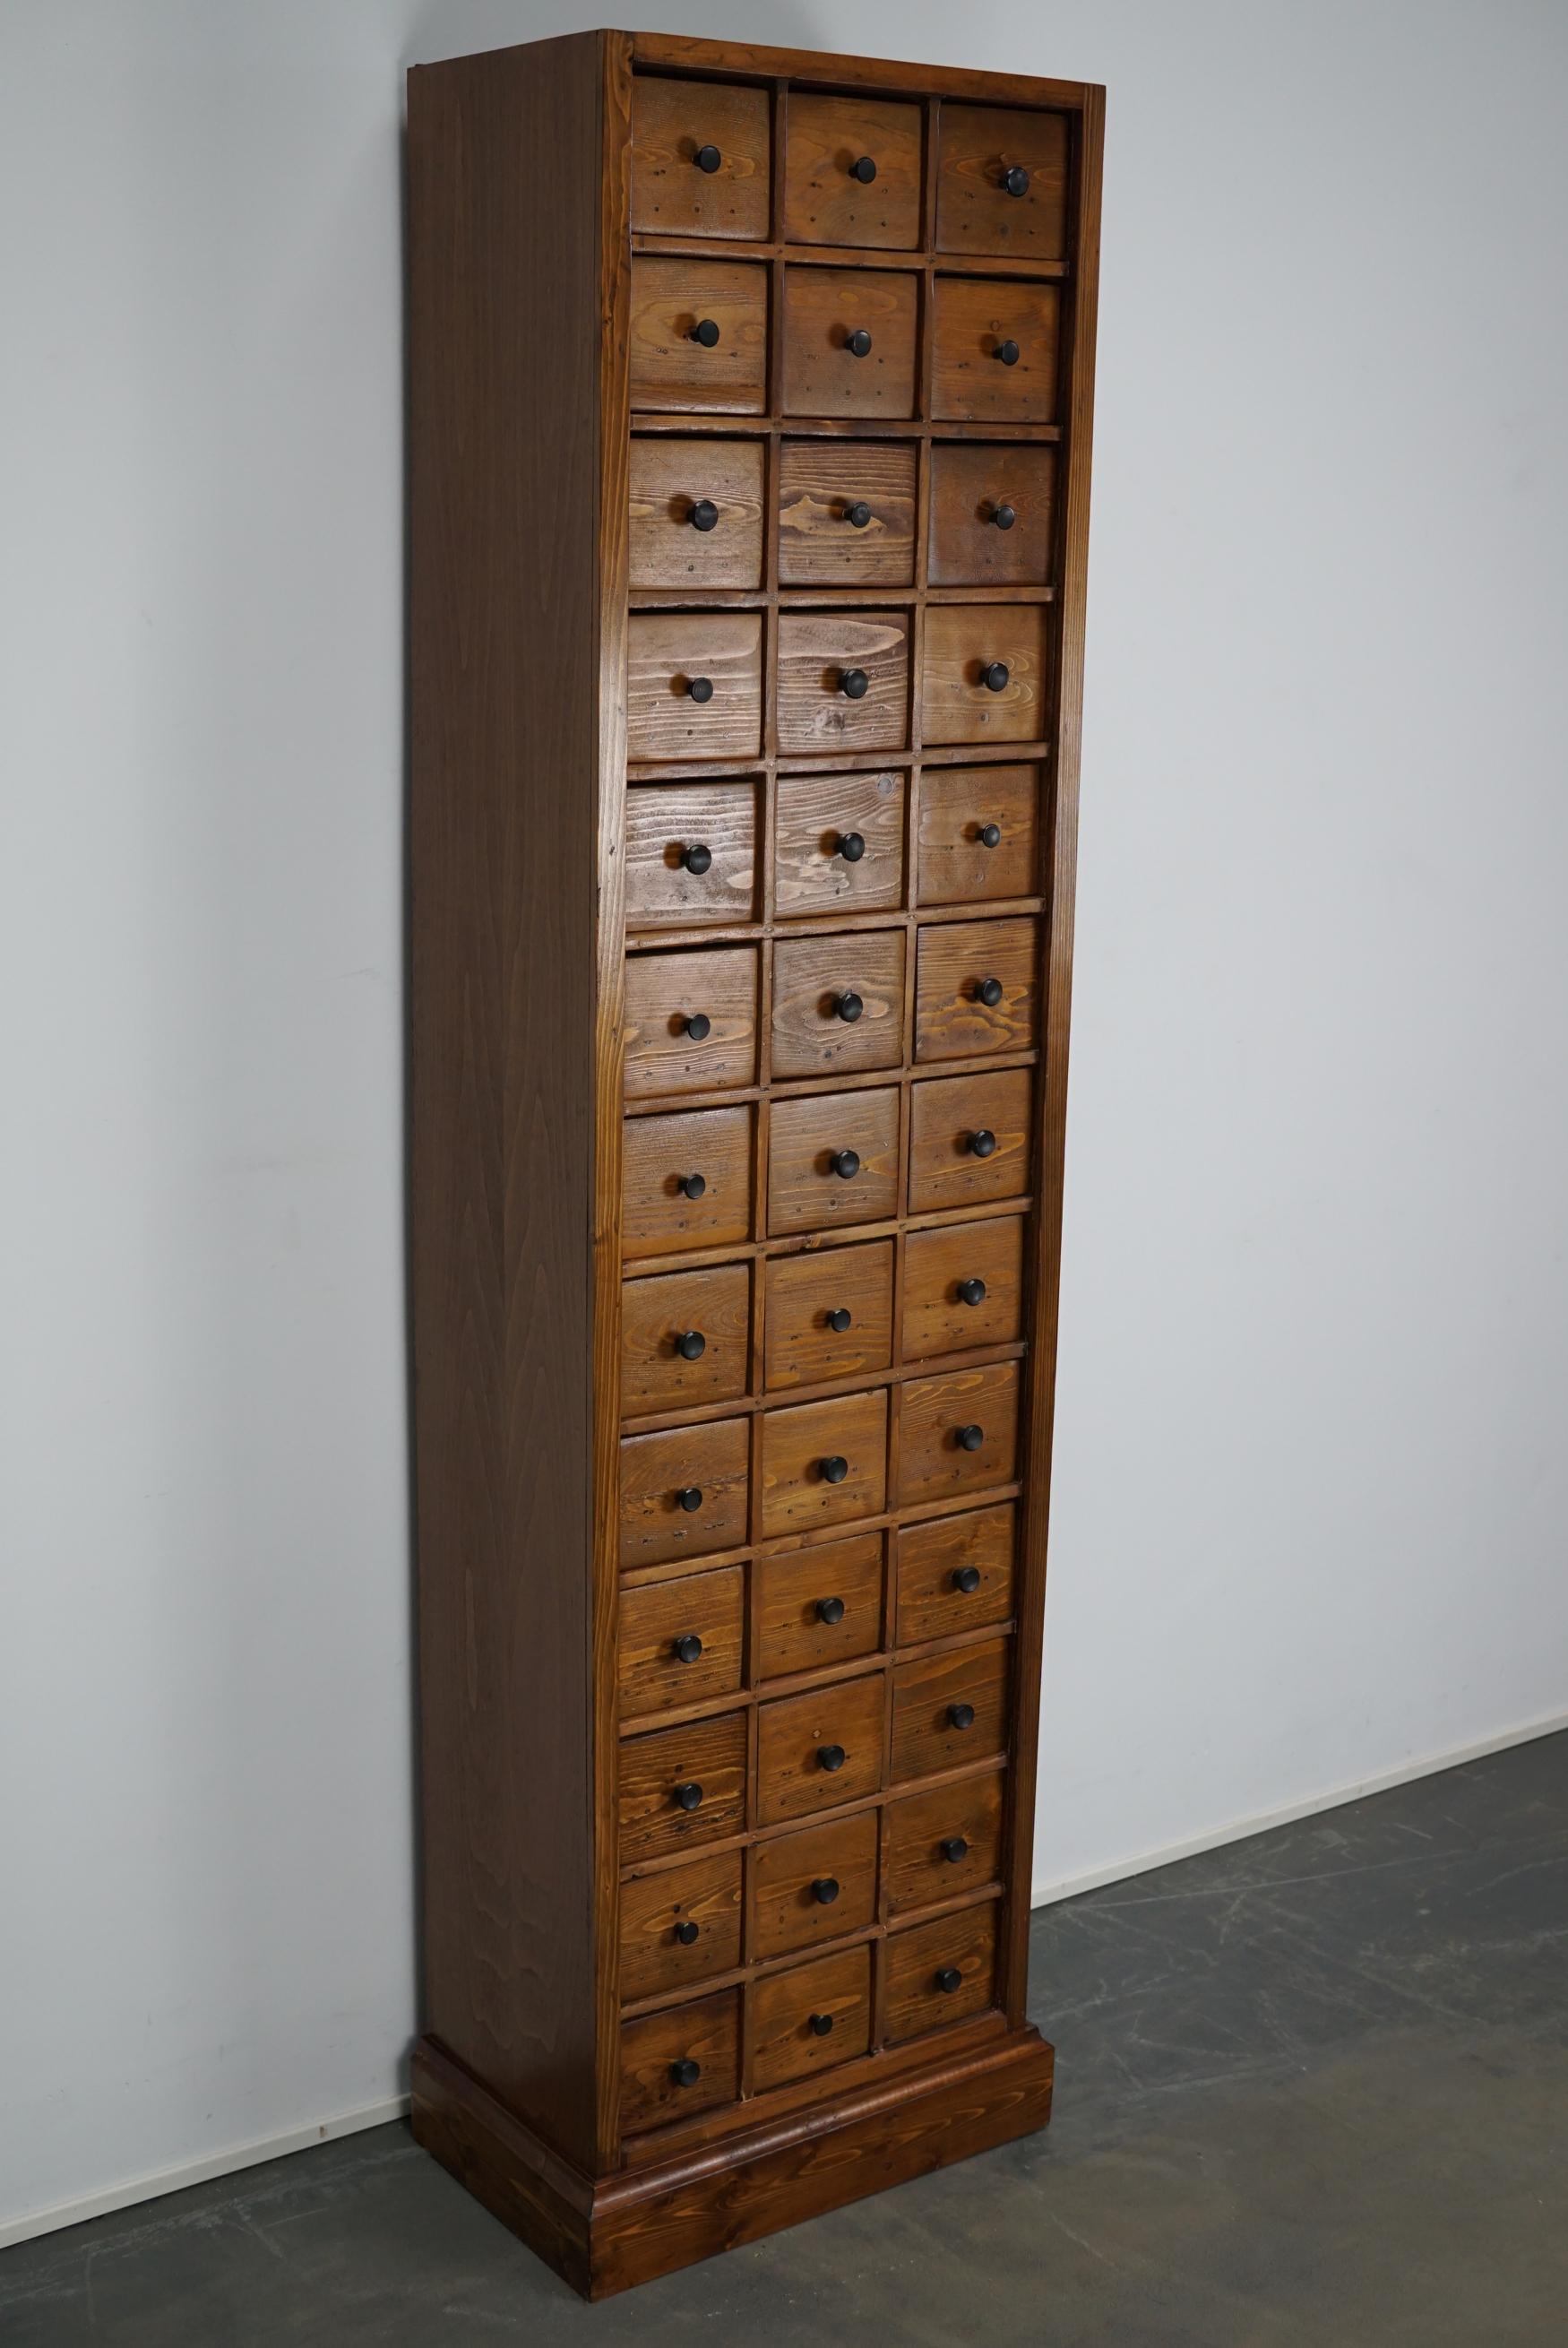 This apothecary cabinet of drawers was designed, circa 1950s in the Netherlands. The piece is made from pine and features 39 drawers with black hardware. The interior dimensions of the drawers are: D 25 x W 11.5 x H 11 cm.